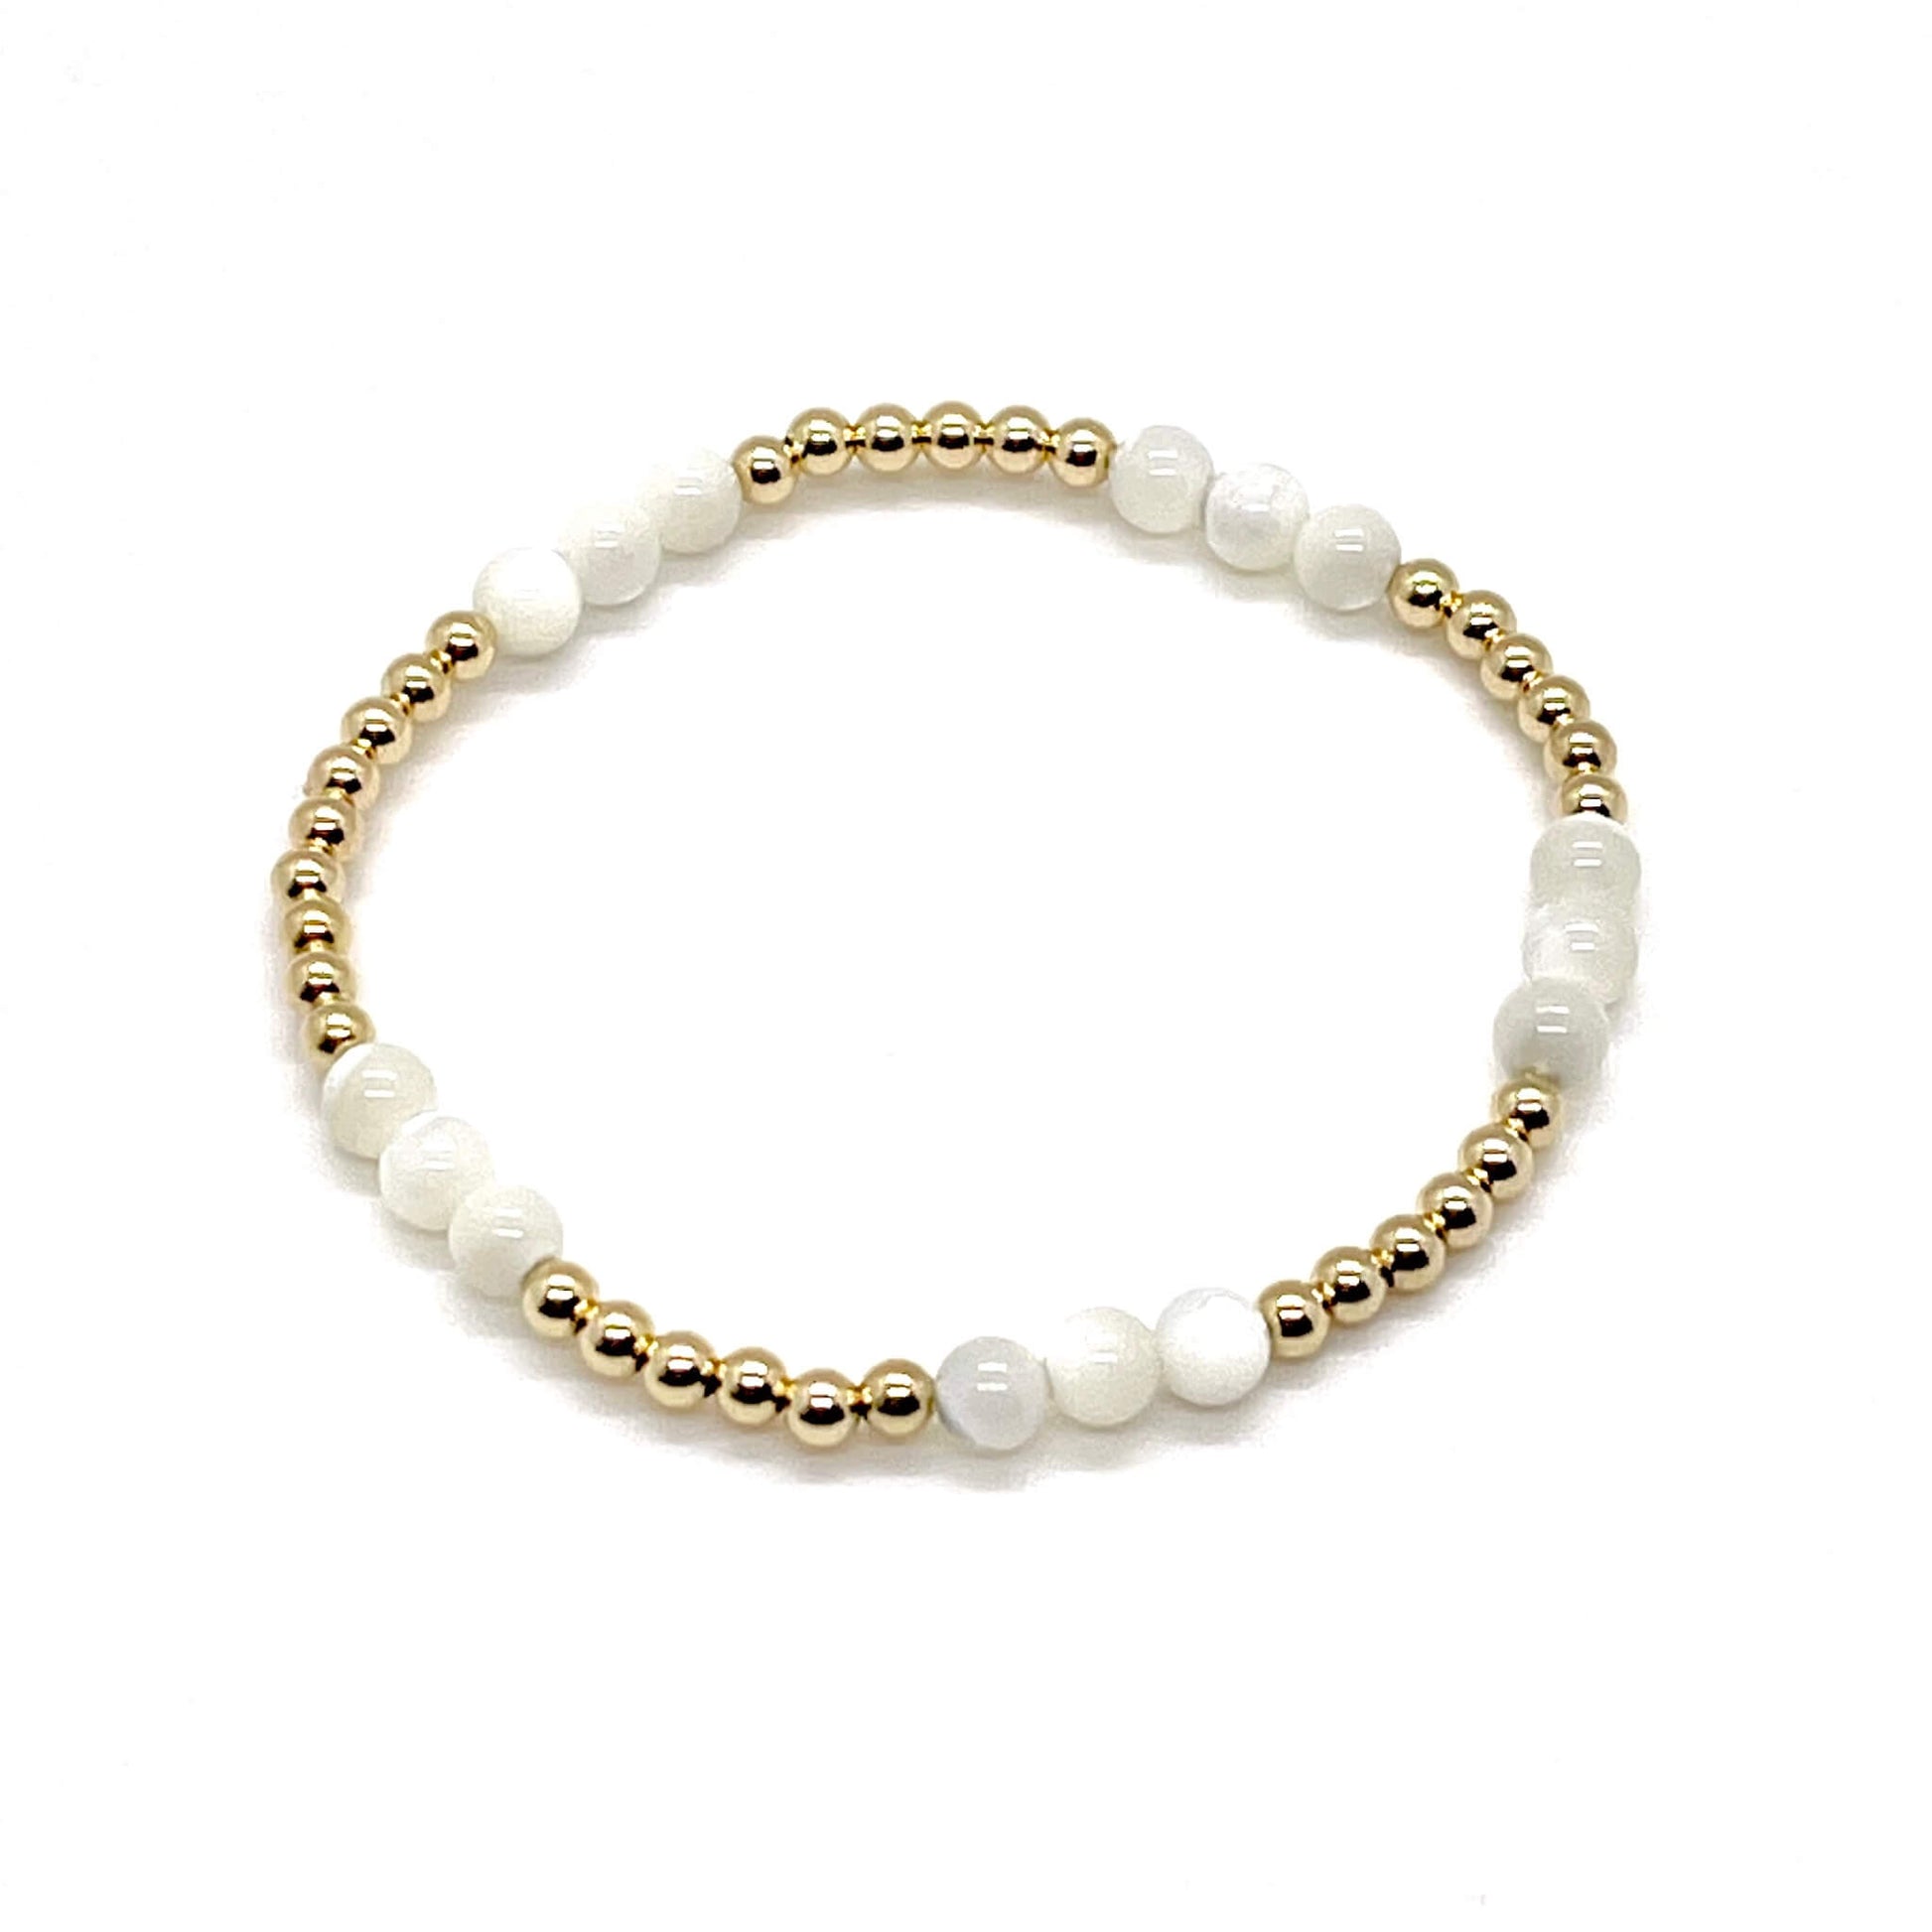 Gold mother-of-pearl bracelet with 14K gold-filled 3mm beads and 4mm mother-of-pearl beads.